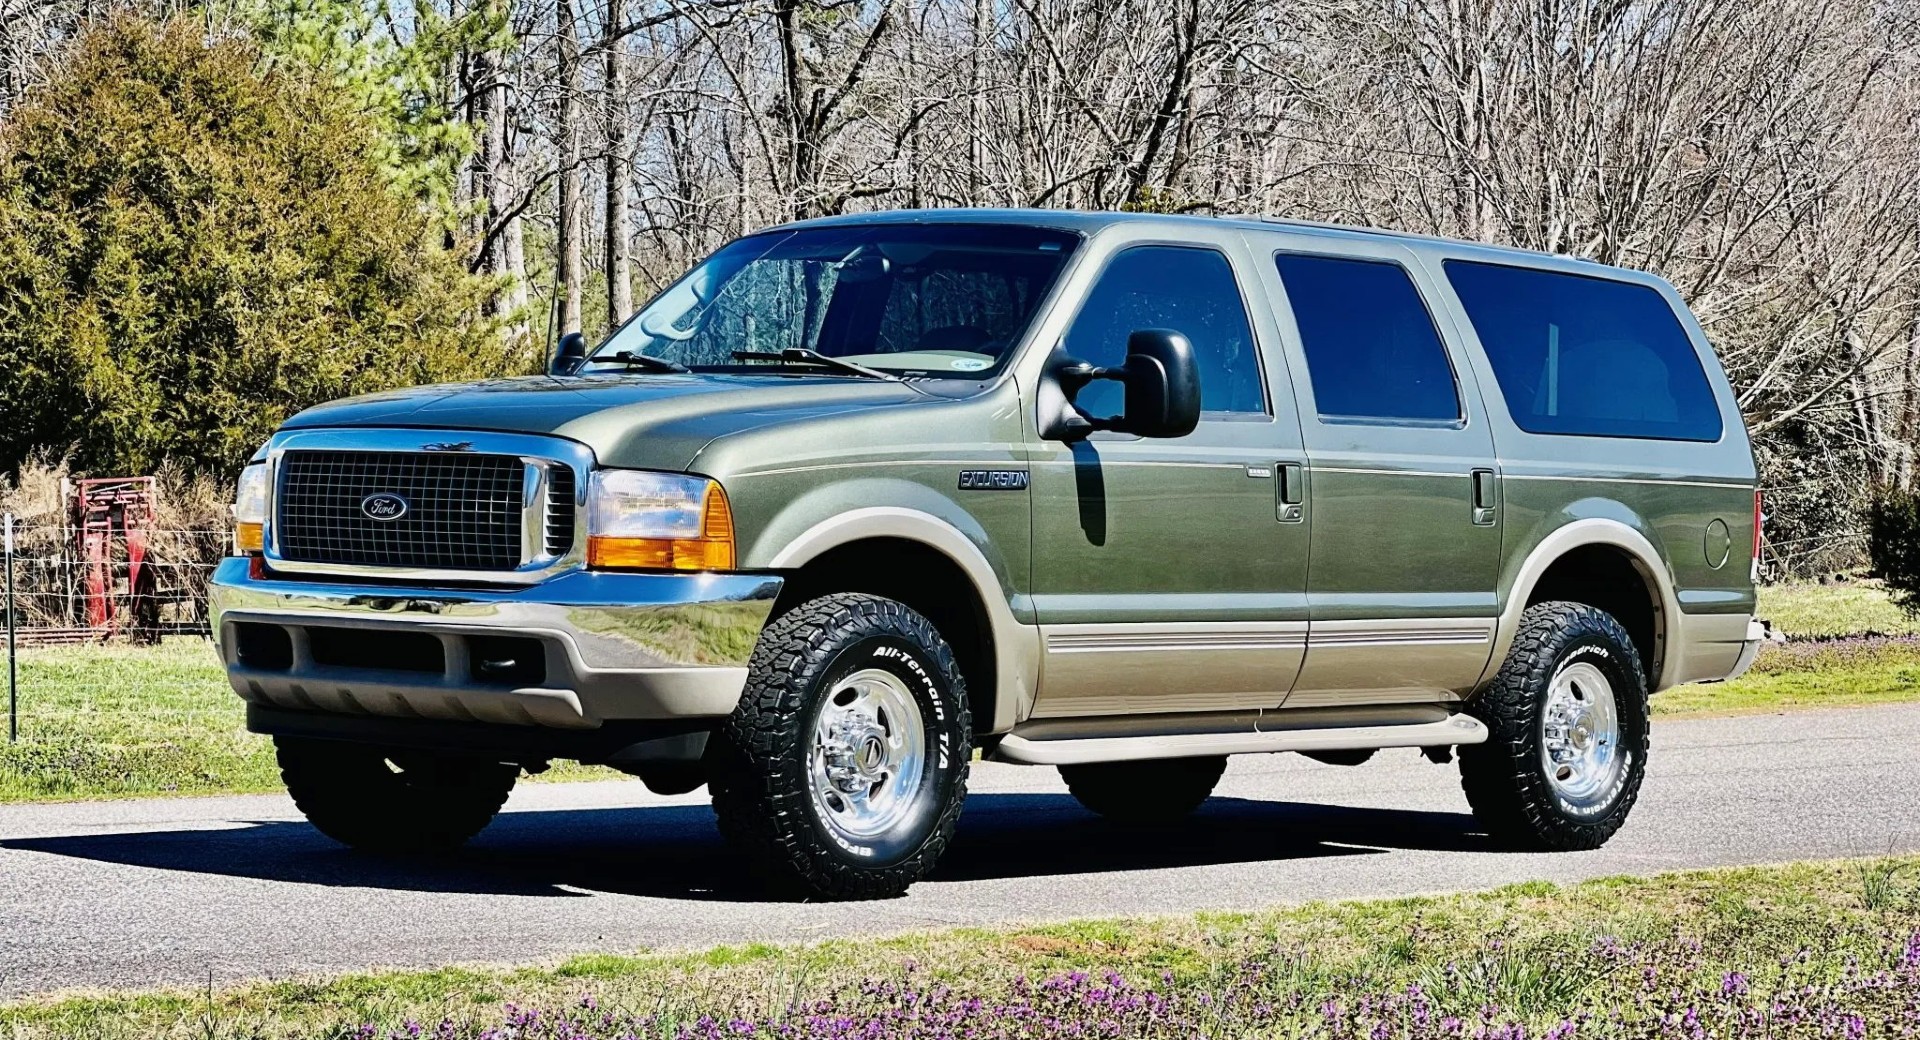 Say What? Someone Dropped $67,500 On A Ford Excursion With 101,000 Miles |  Carscoops